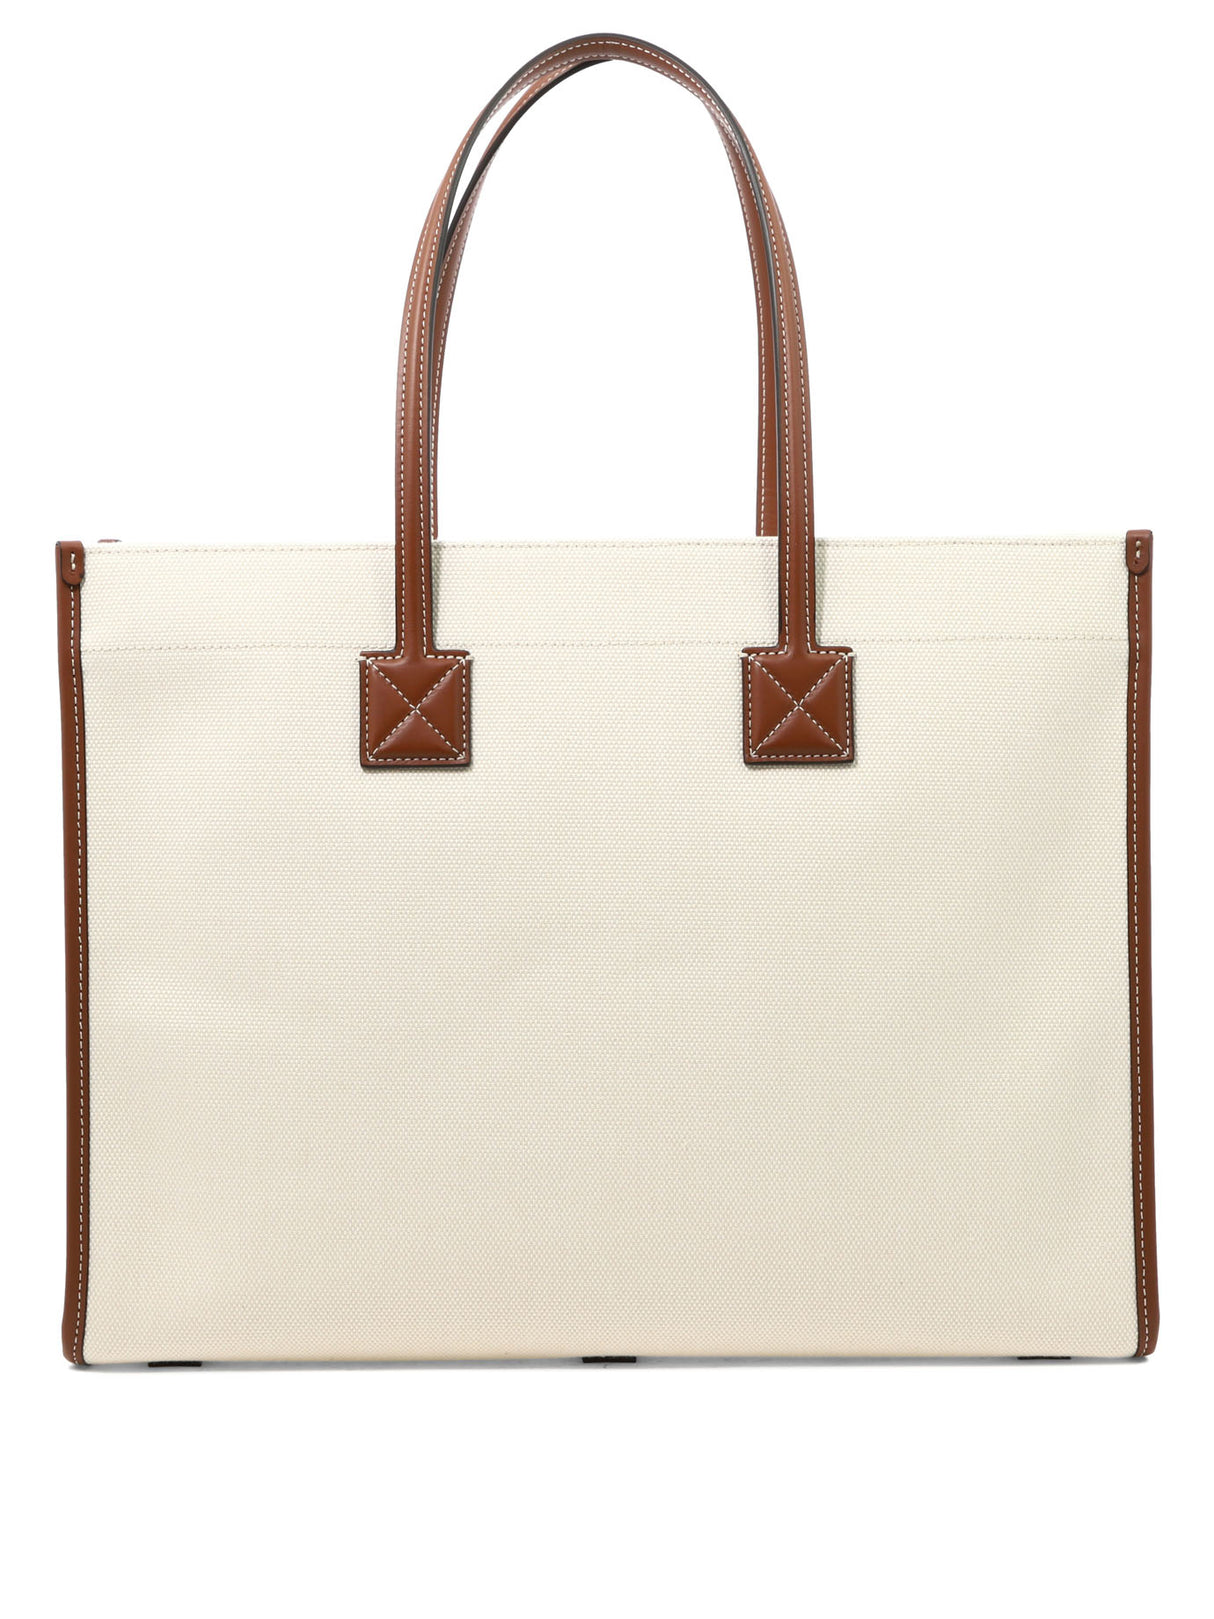 BURBERRY Tan Leather "Medium Freya" Tote with Horsefairy Print and Polished Metal Details